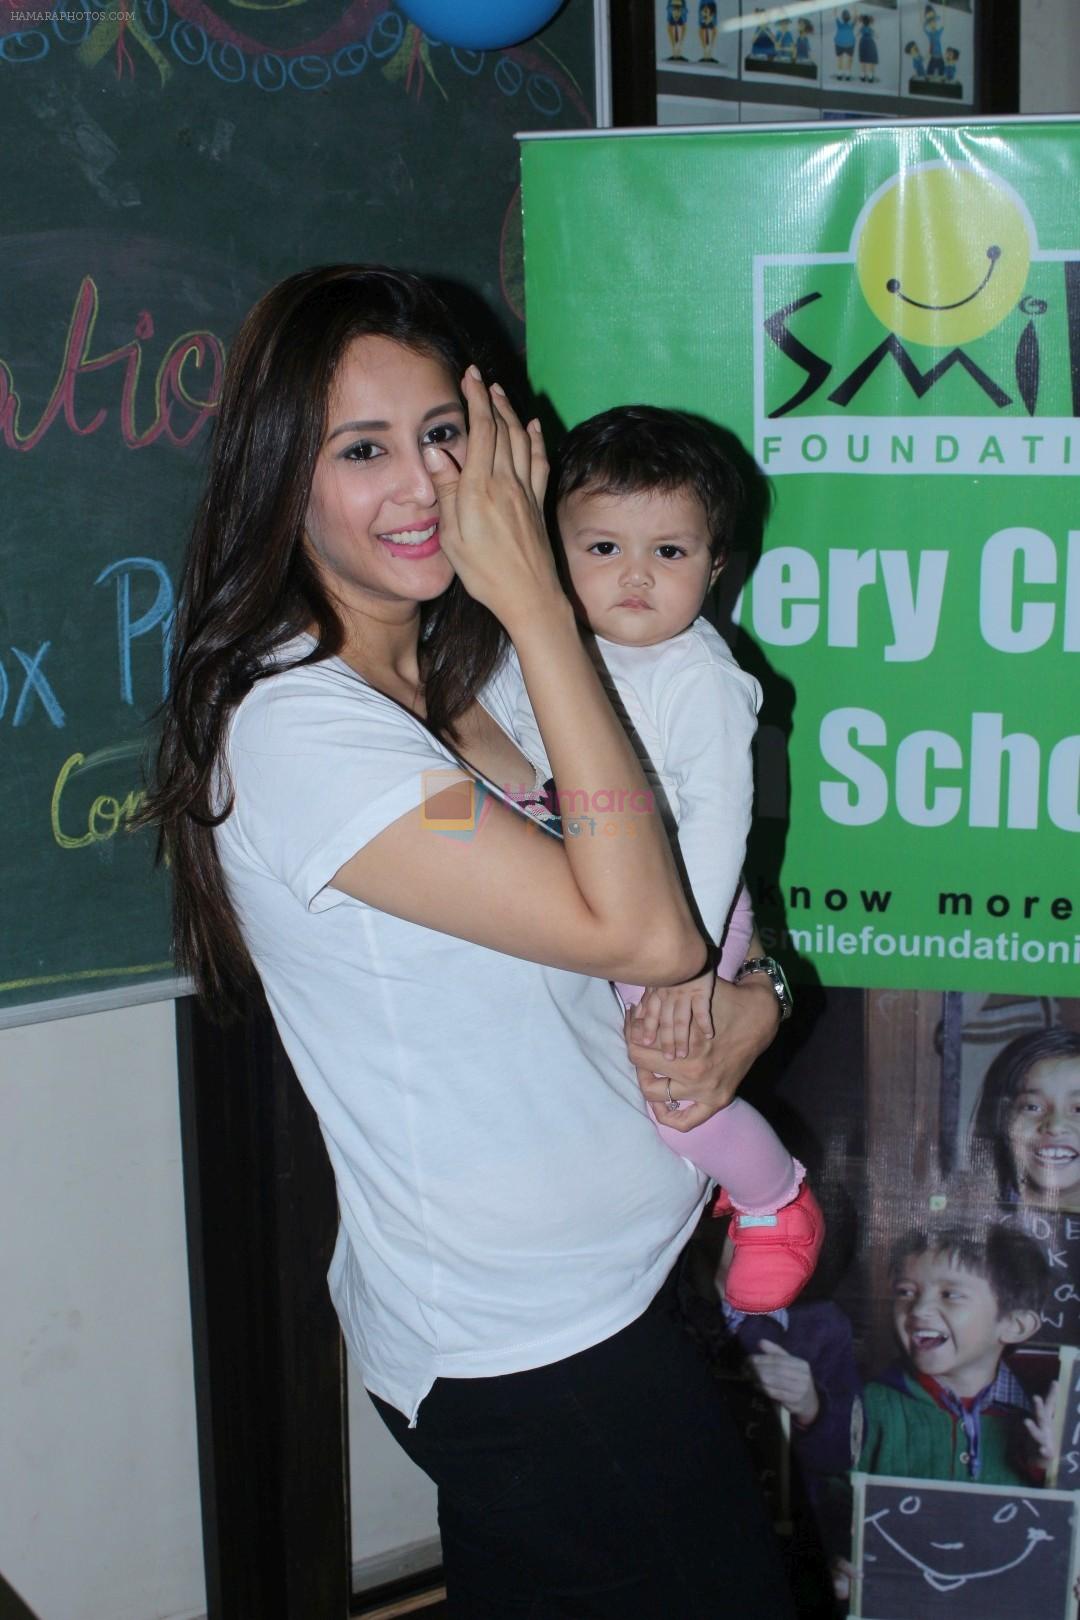 Chahat Khanna At Smile Foundation Celebrating 8 Years Celebration With Kids on 20th July 2017